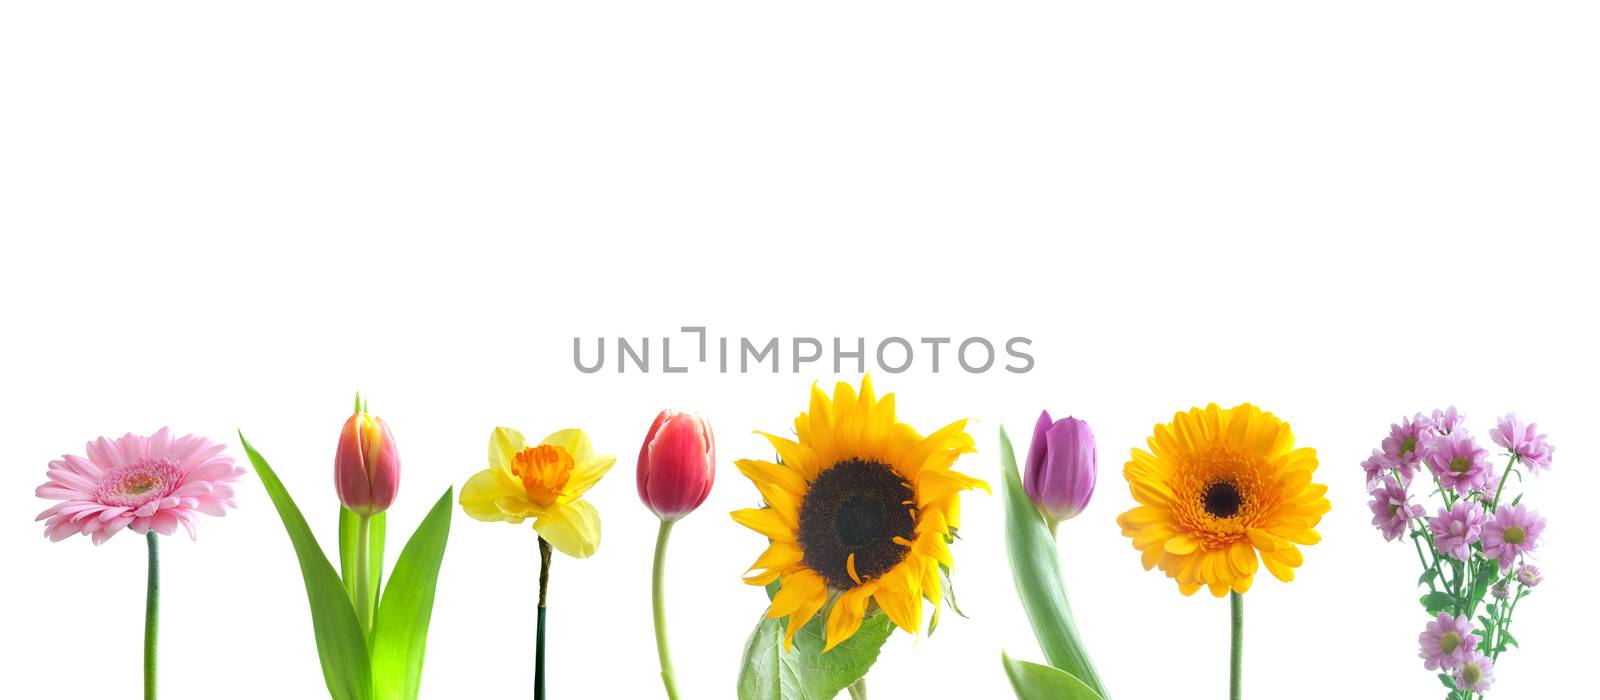 Spring flowers border over a white background